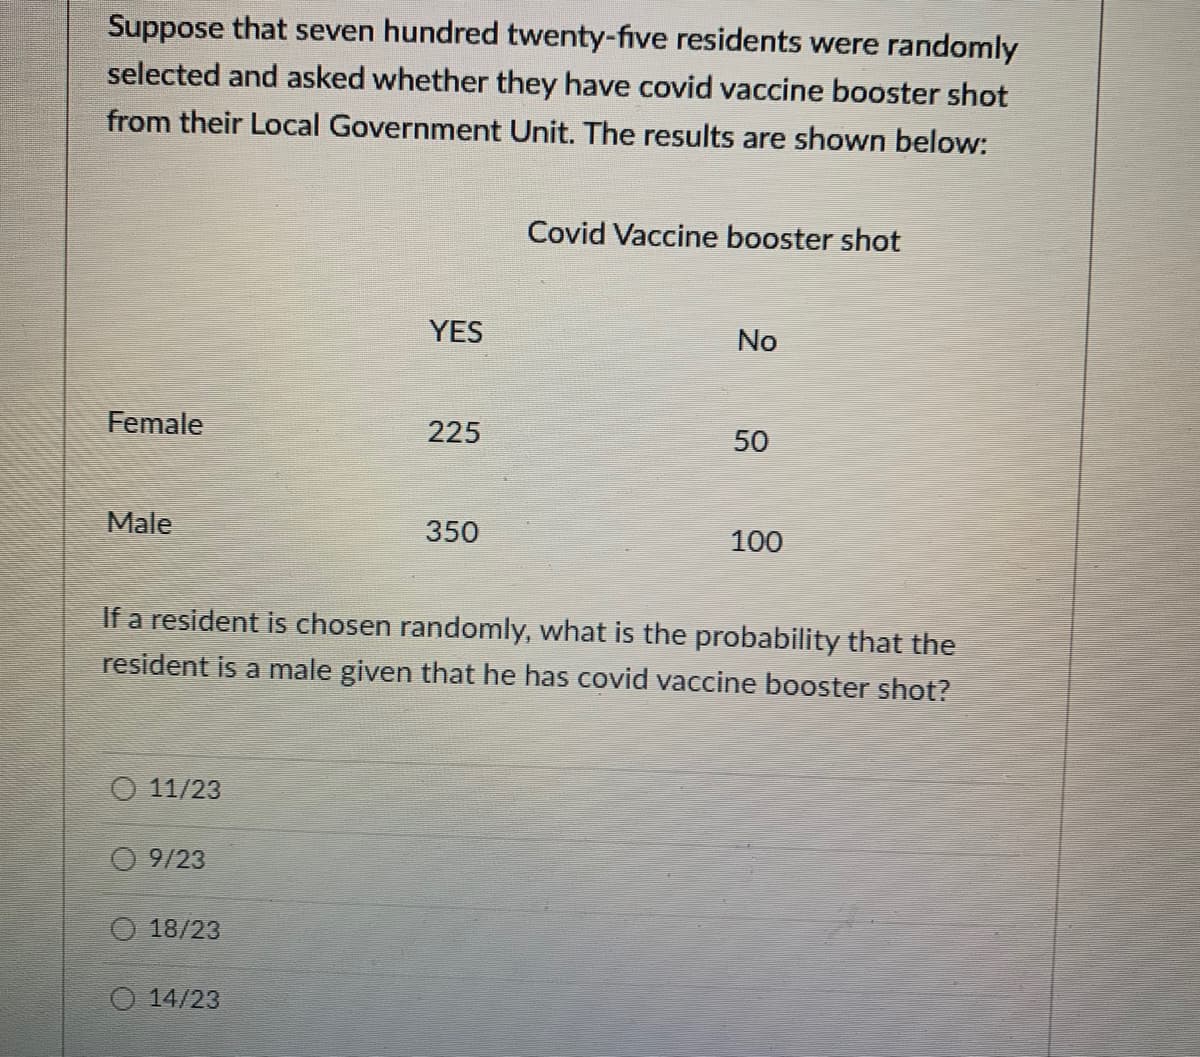 Suppose that seven hundred twenty-five residents were randomly
selected and asked whether they have covid vaccine booster shot
from their Local Government Unit. The results are shown below:
Covid Vaccine booster shot
YES
No
Female
225
50
Male
350
100
If a resident is chosen randomly, what is the probability that the
resident is a male given that he has covid vaccine booster shot?
O 11/23
9/23
O 18/23
O 14/23
